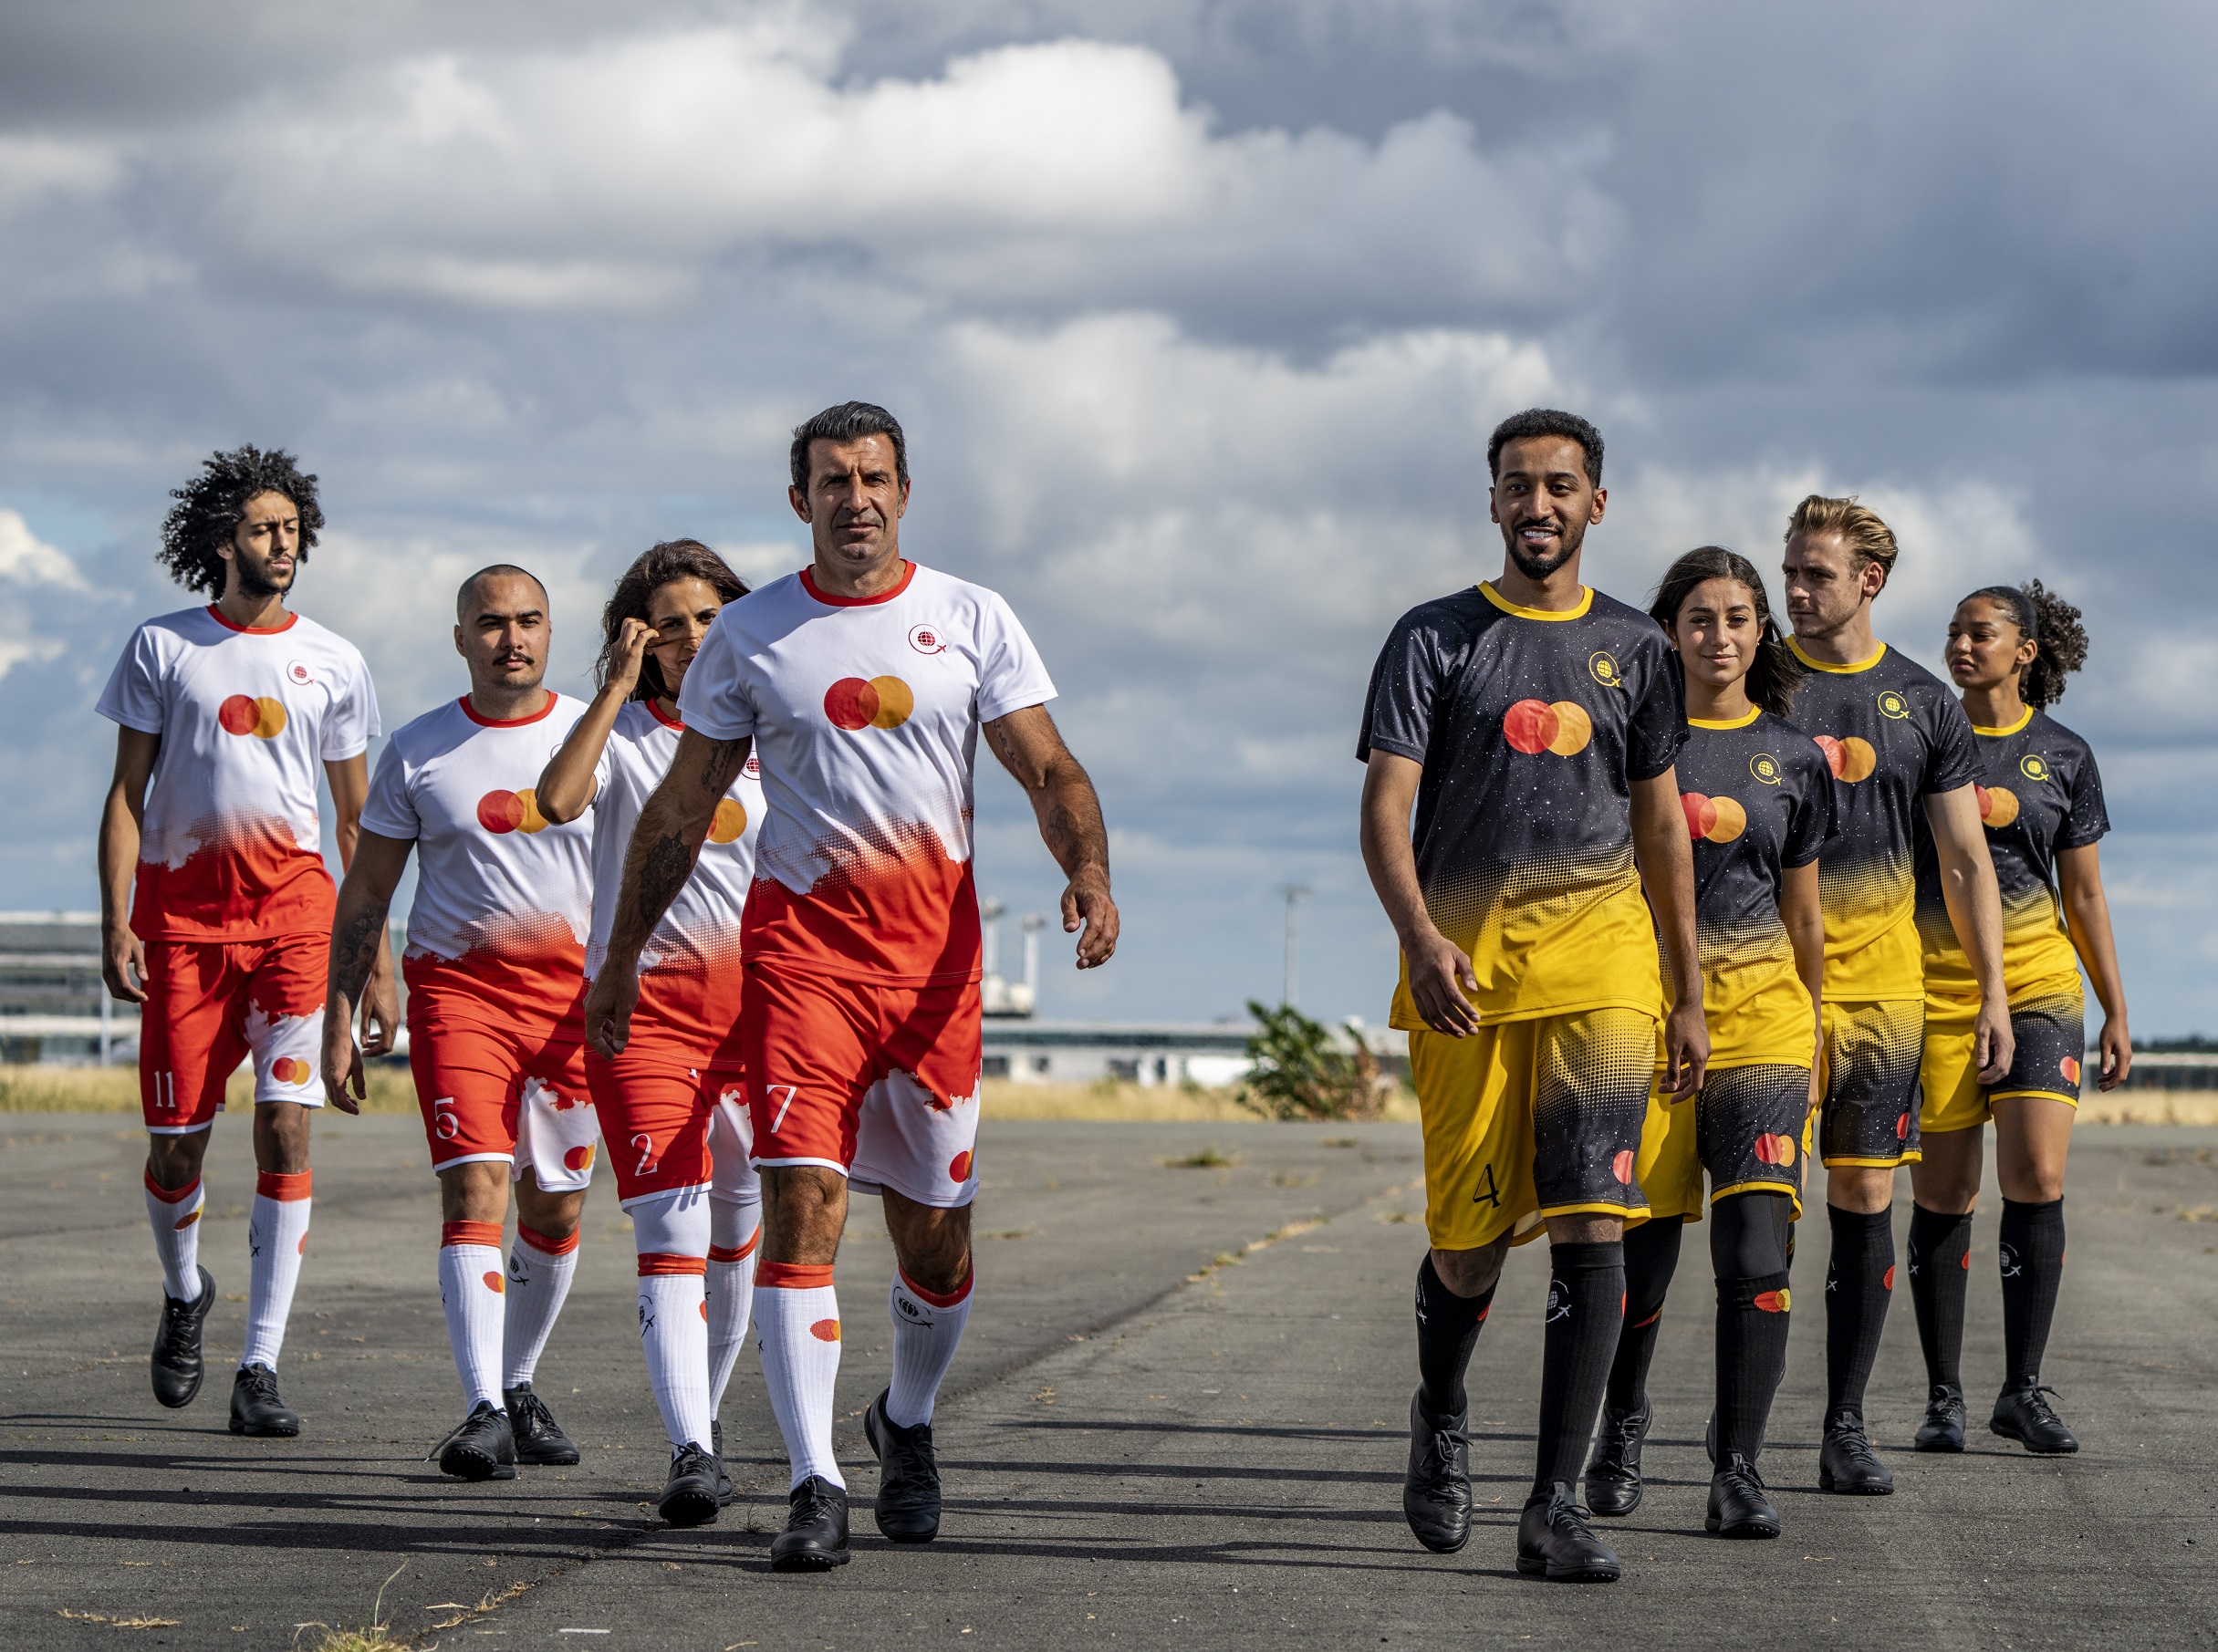 Mastercard sets GUINNESS WORLD RECORDS for the ‘Highest Altitude Game of Football (Soccer) on a Parabolic Flight